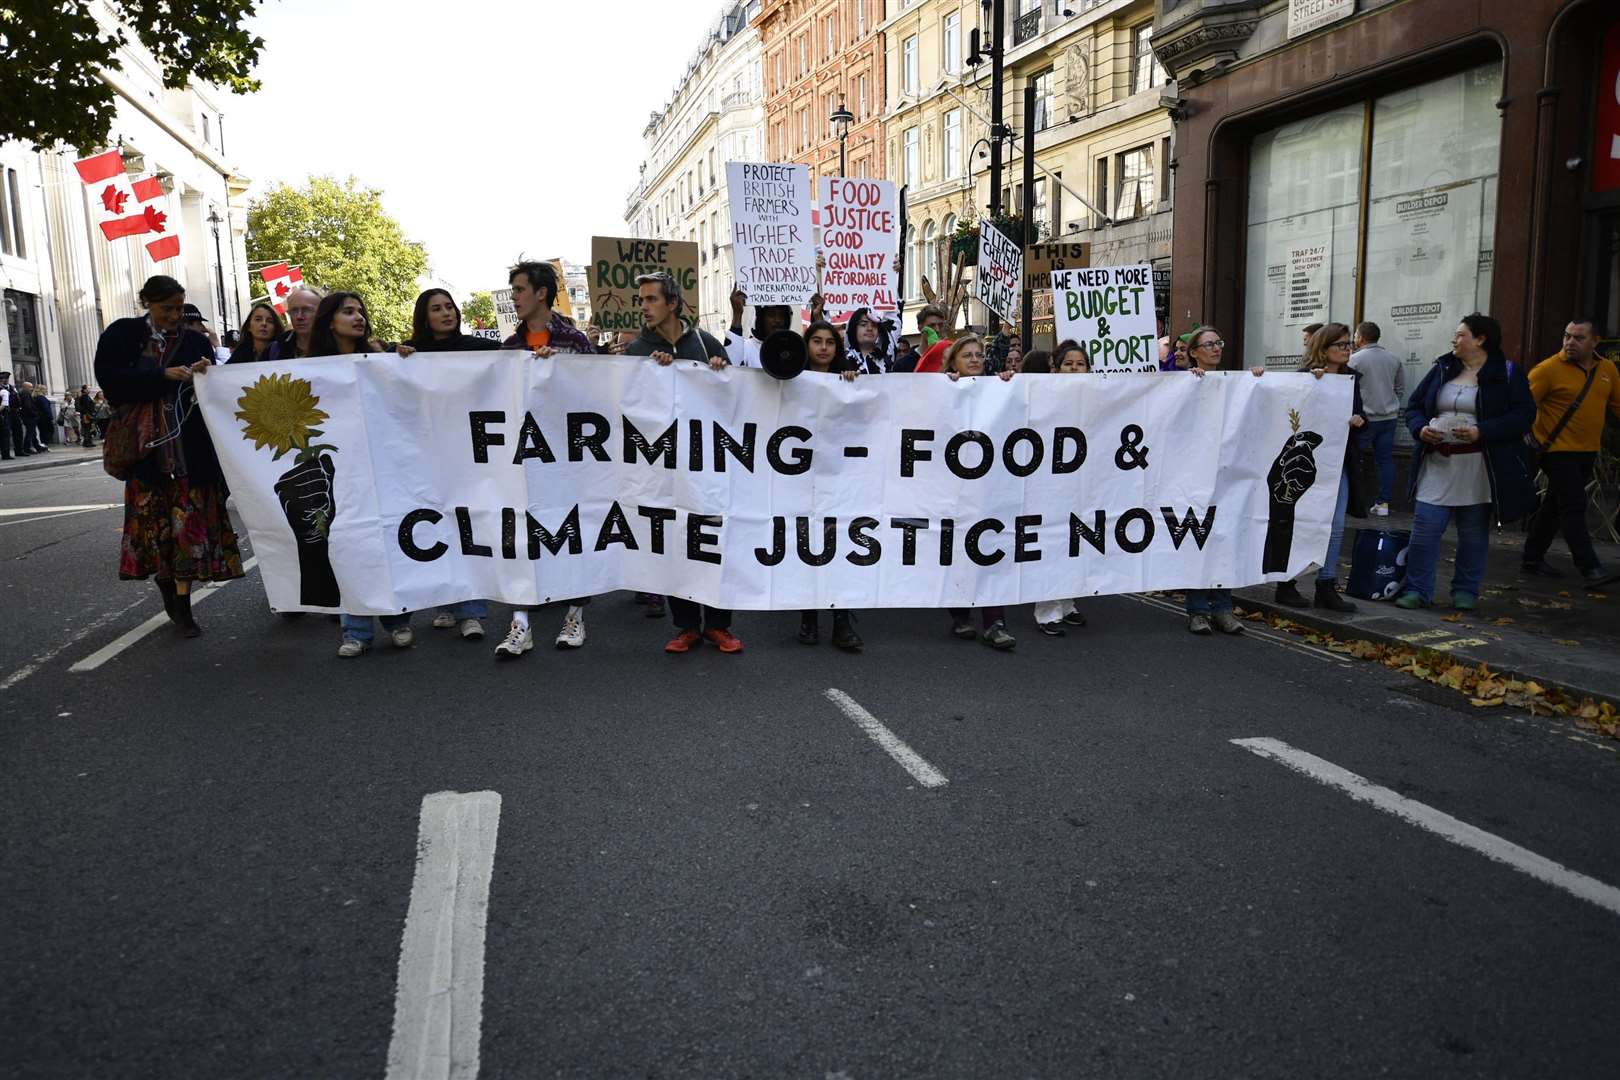 Farm workers and environmental activists march through central London